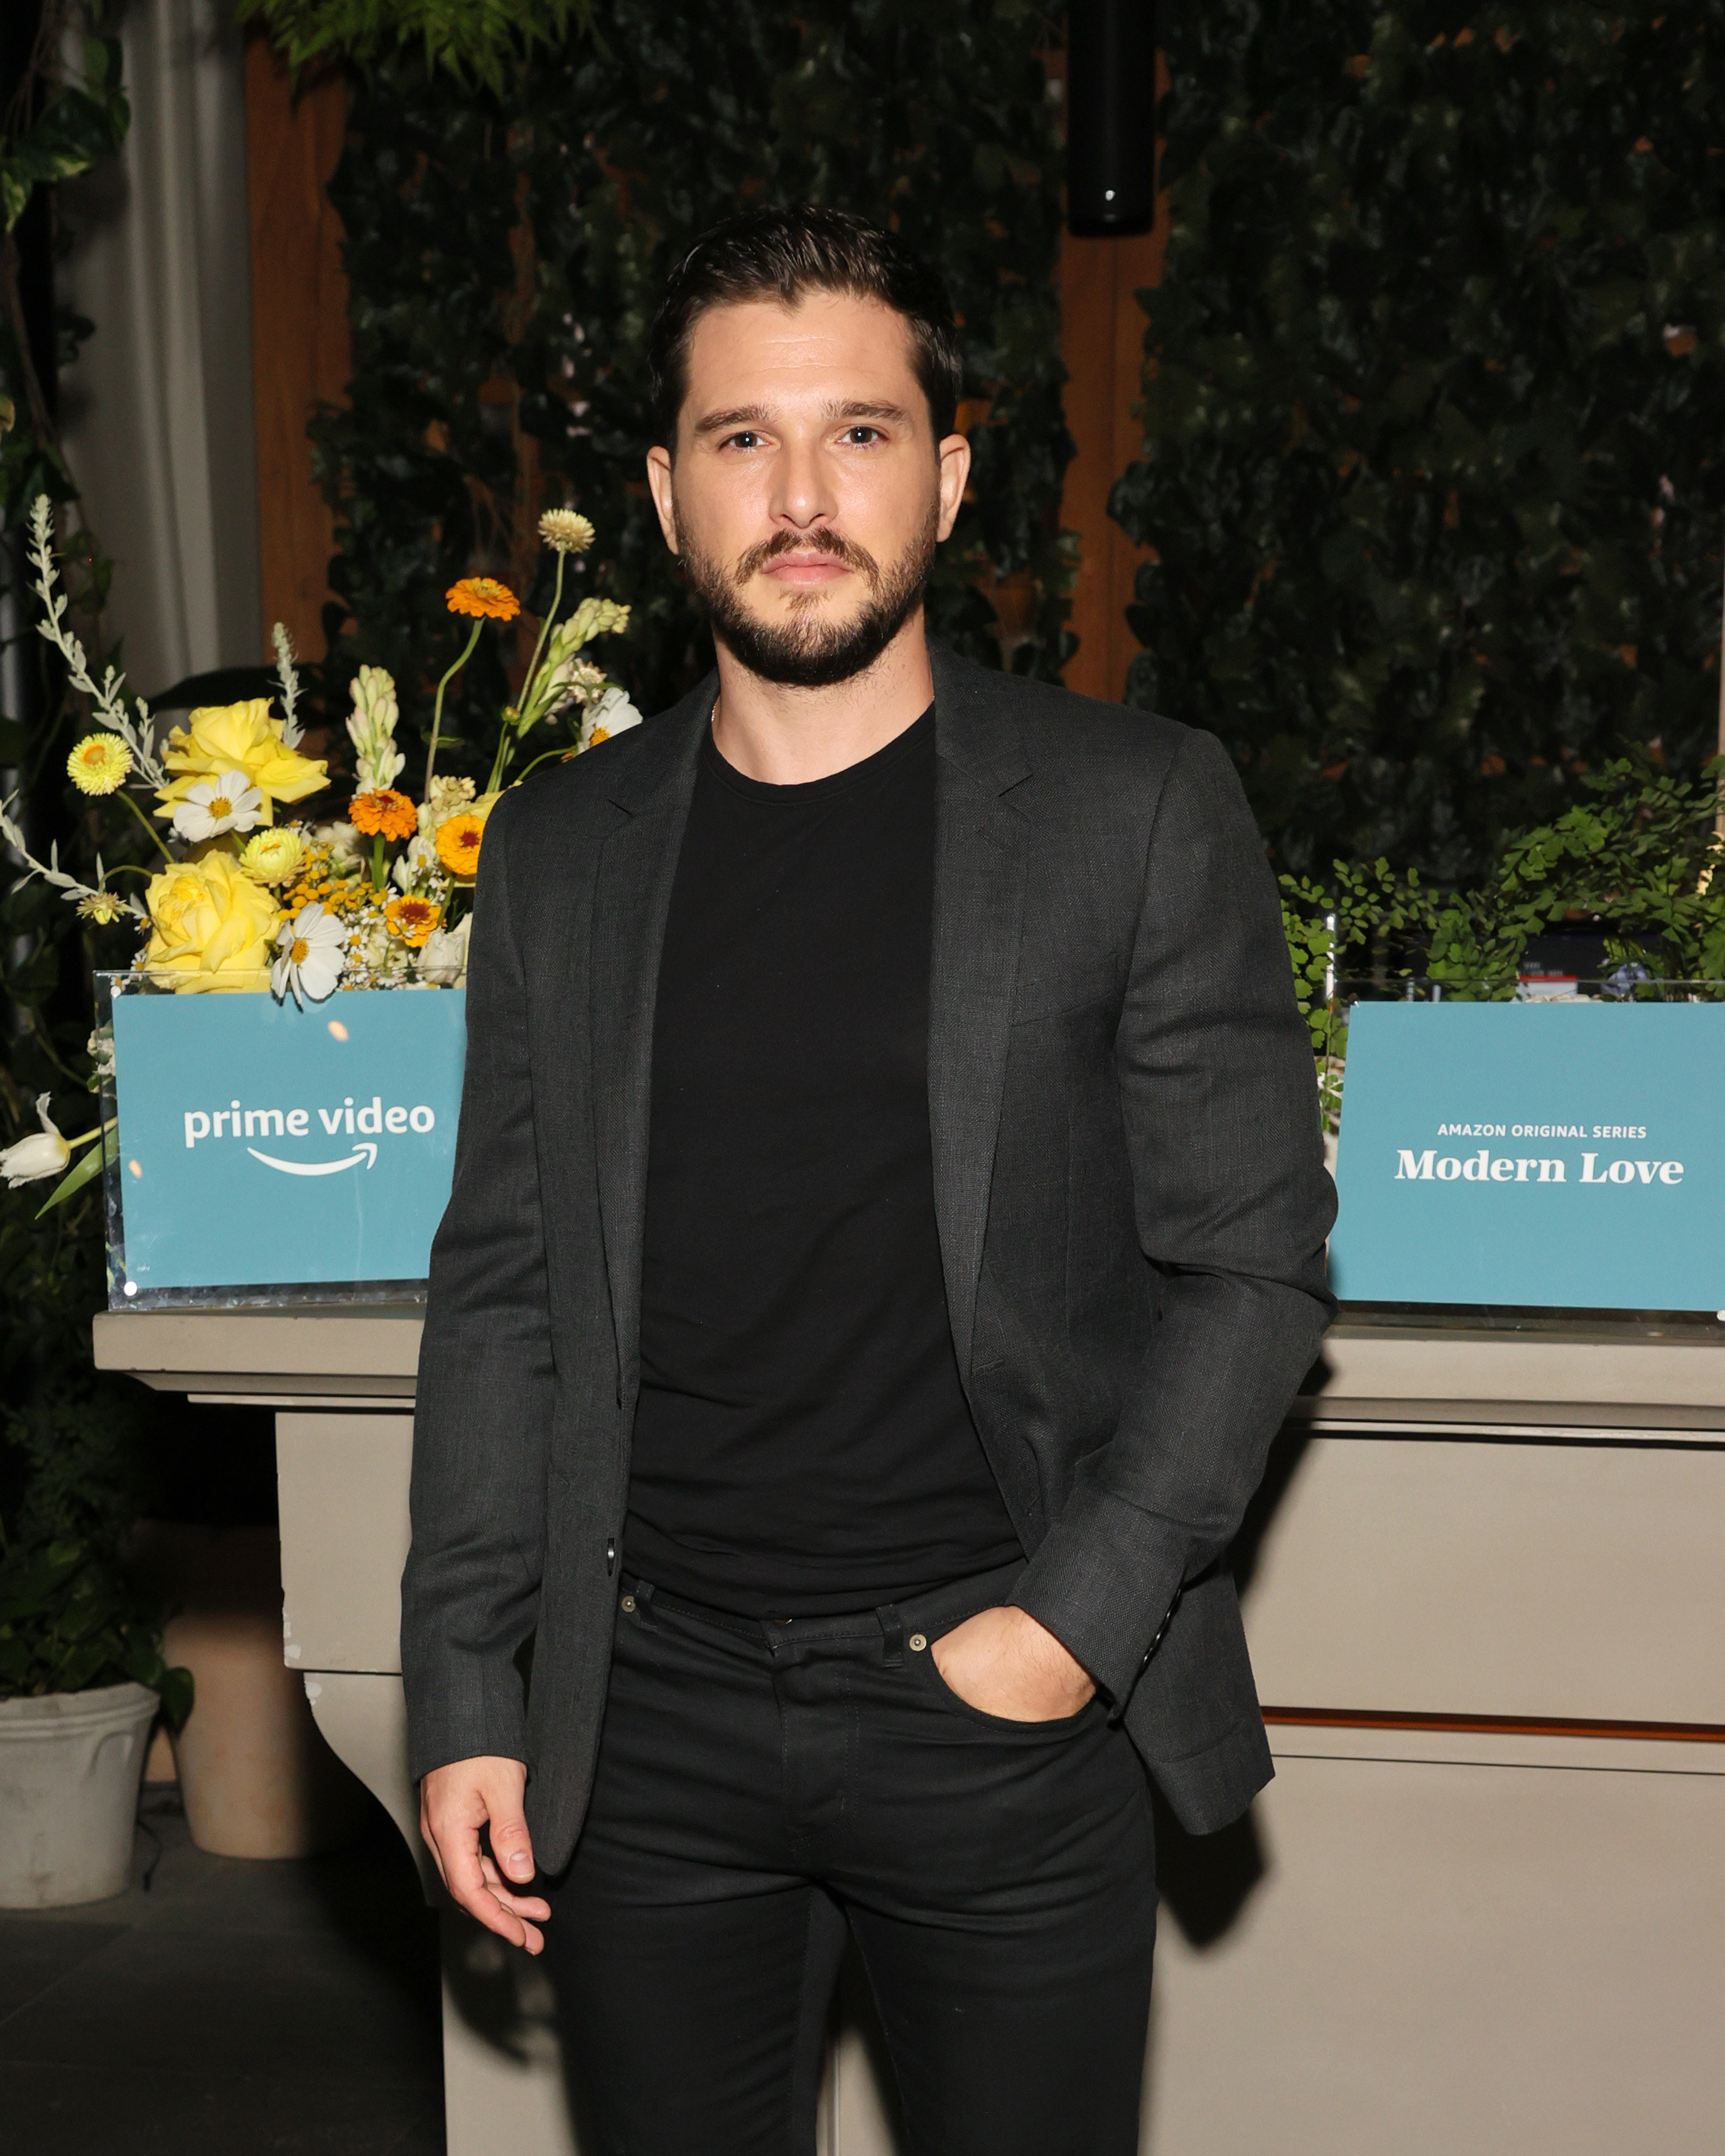 Kit posing with his hand in his pocket